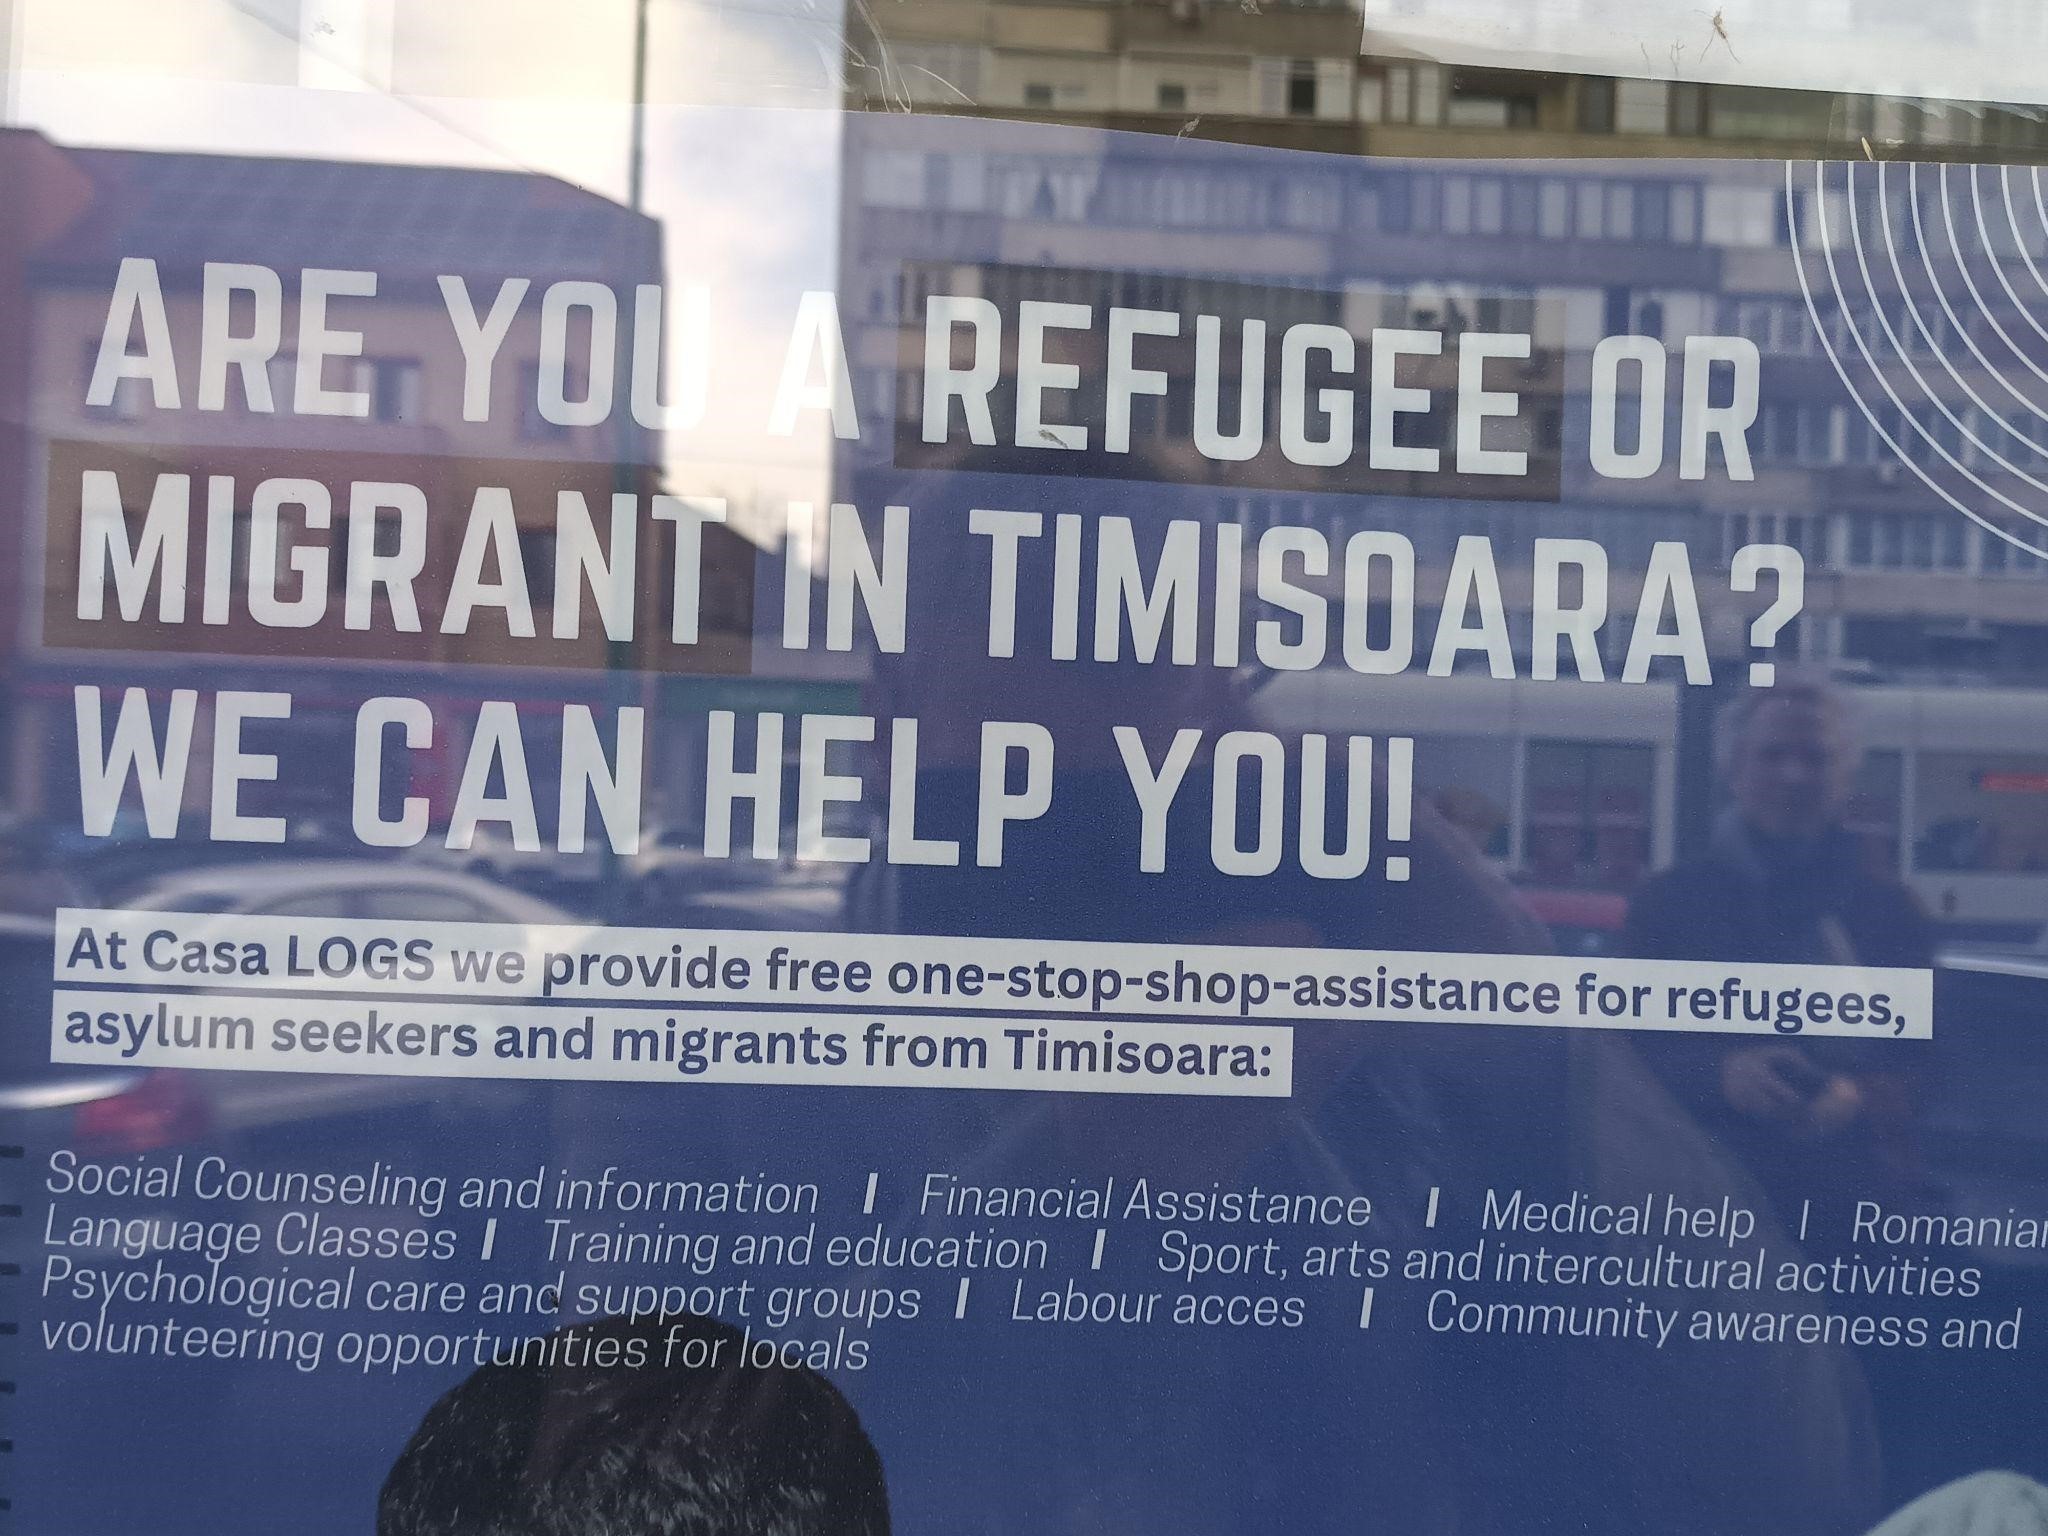 Are you refugee or migrant in Timisoara? We can help you!